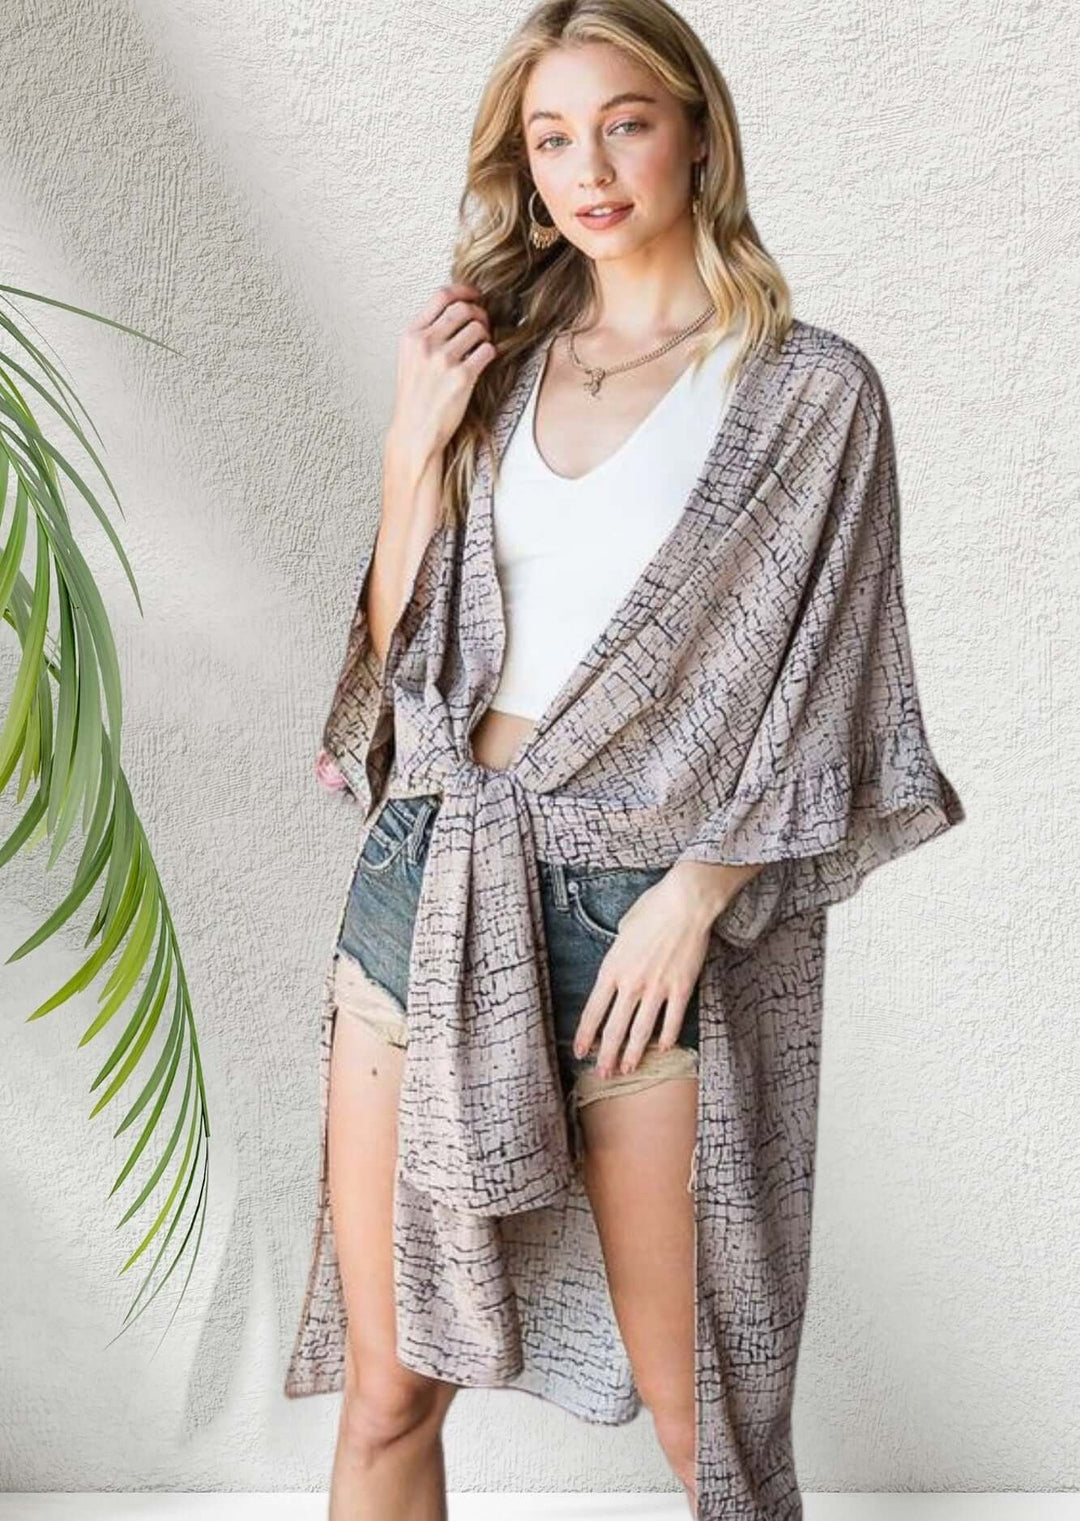 Made in USA Women's Taupe & Navy Versatile Kimono Cardigan with Ruffled Sleeves and Optional Tie Front | Classy Cozy Cool Women's Made in America Boutique